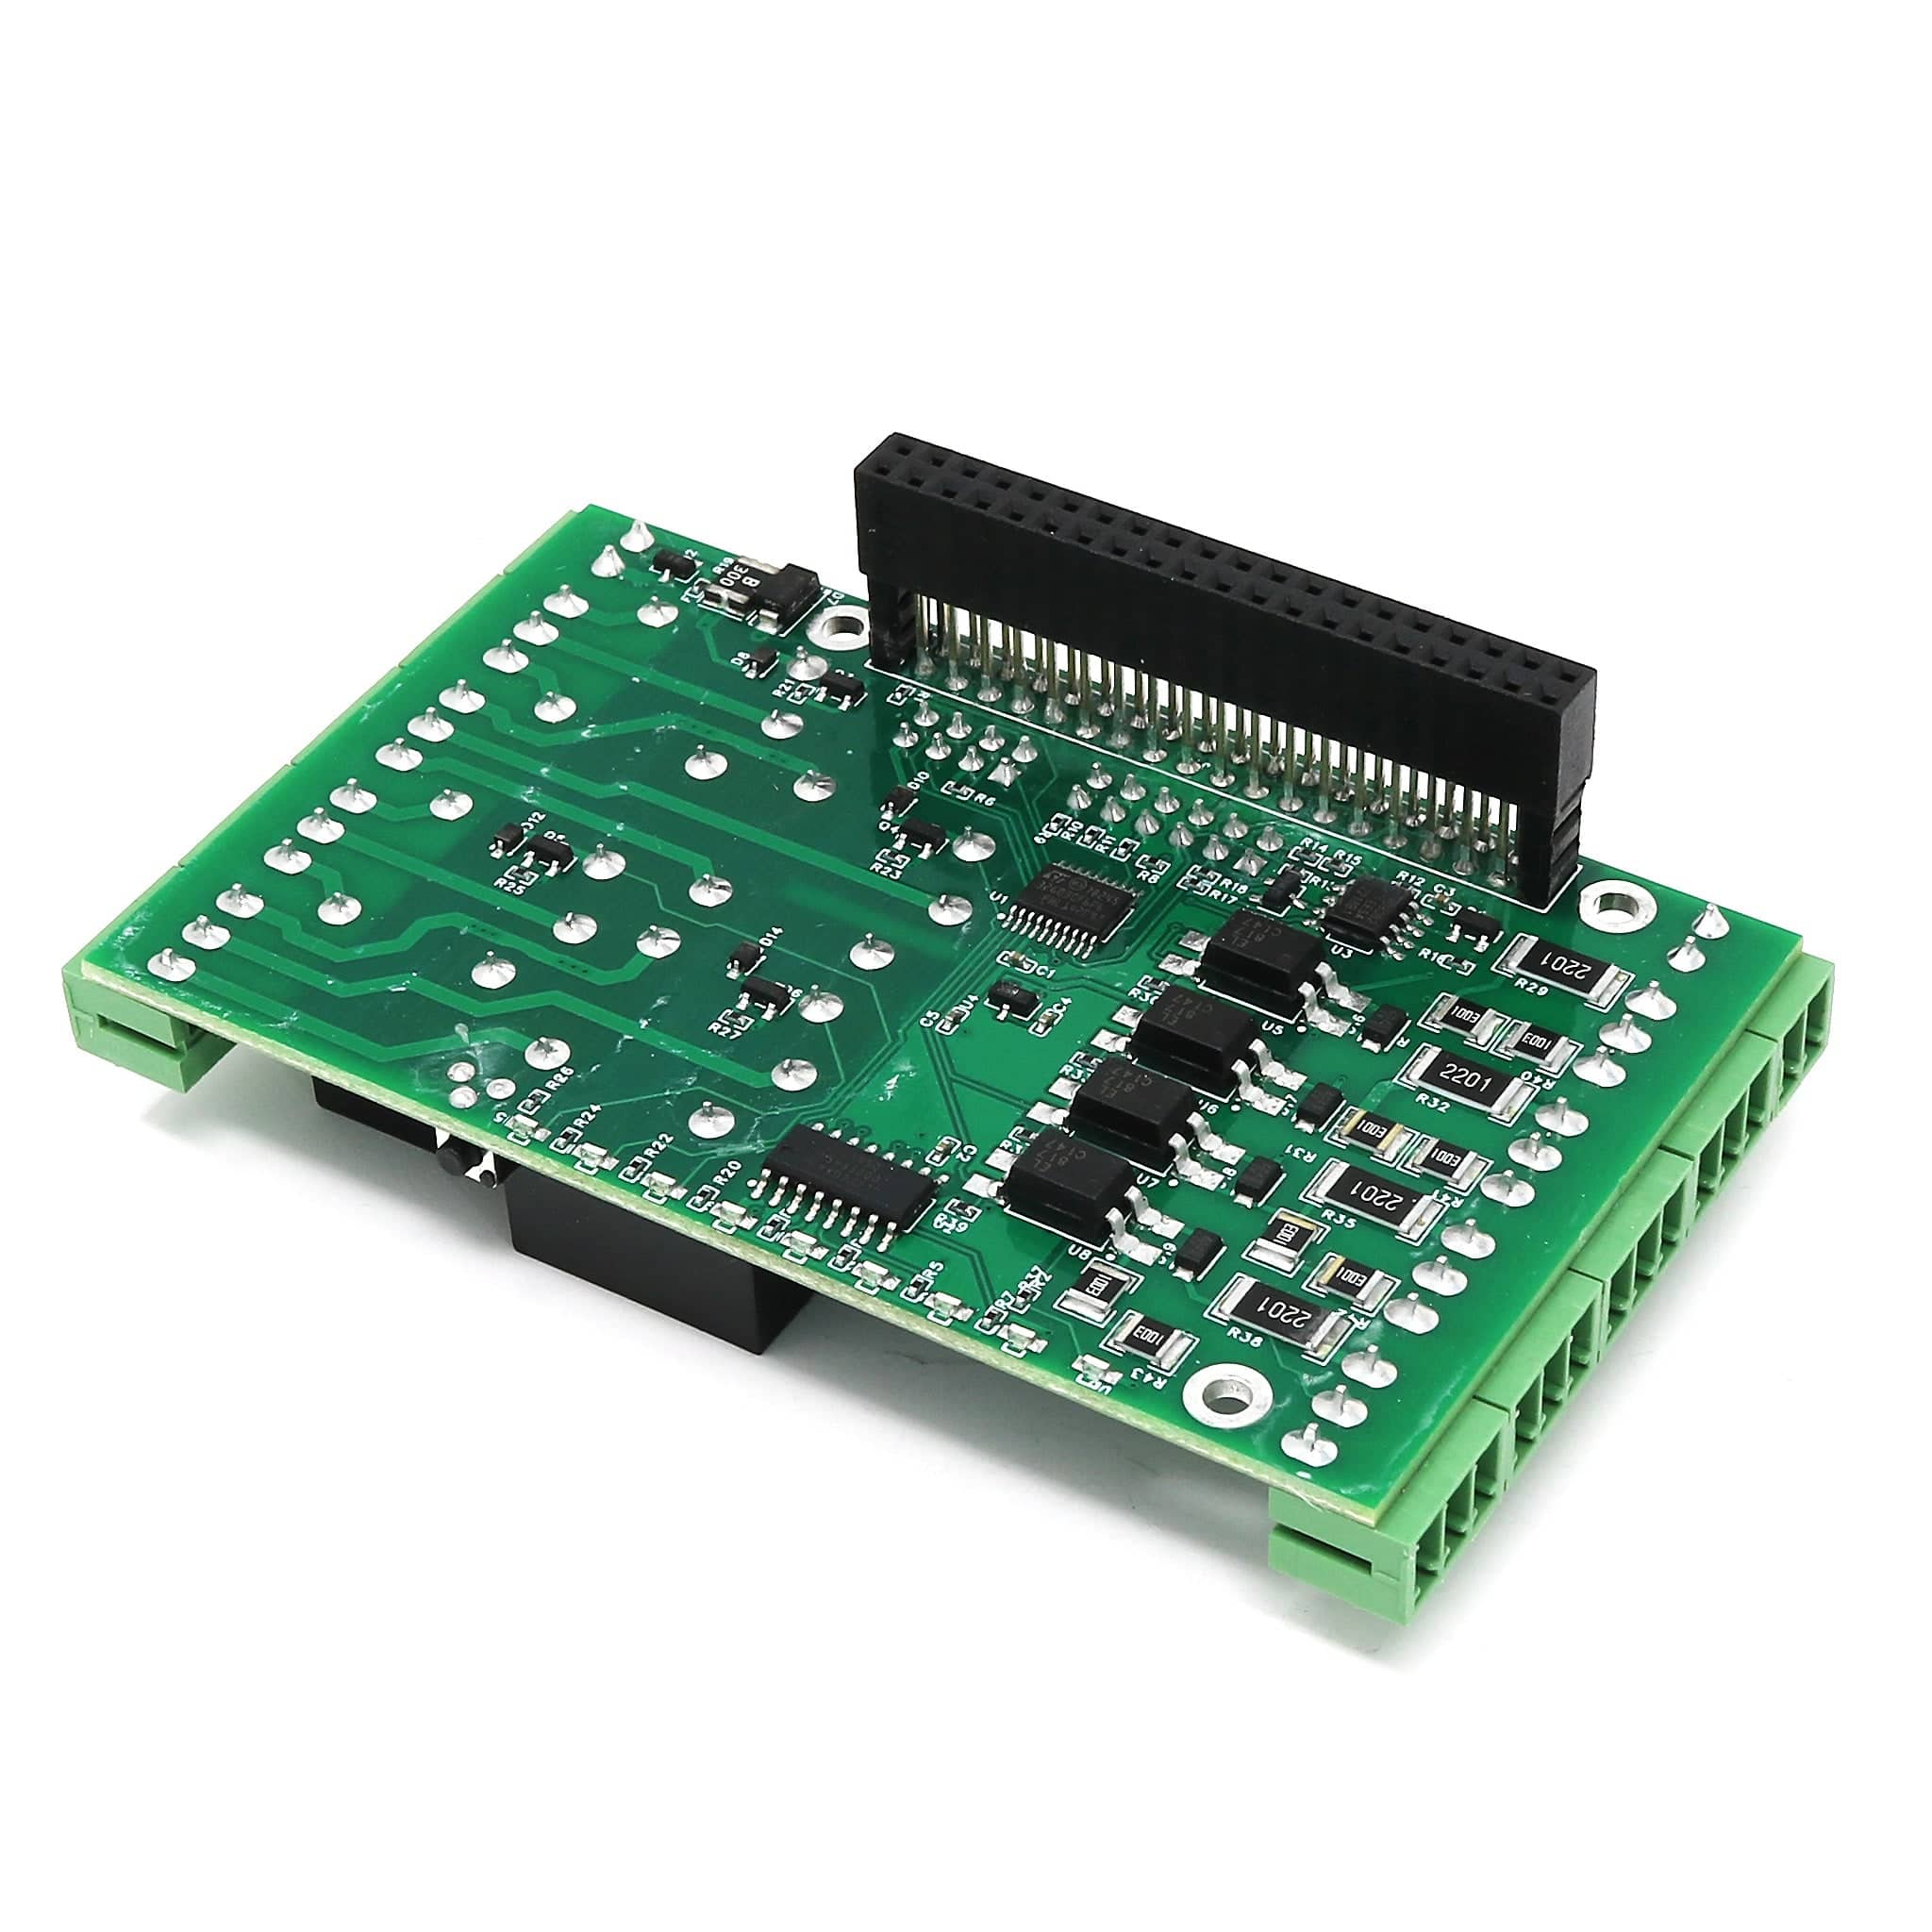 Four Relays Four Inputs 8-Layer Stackable Card for Raspberry Pi V4.0 - The Pi Hut